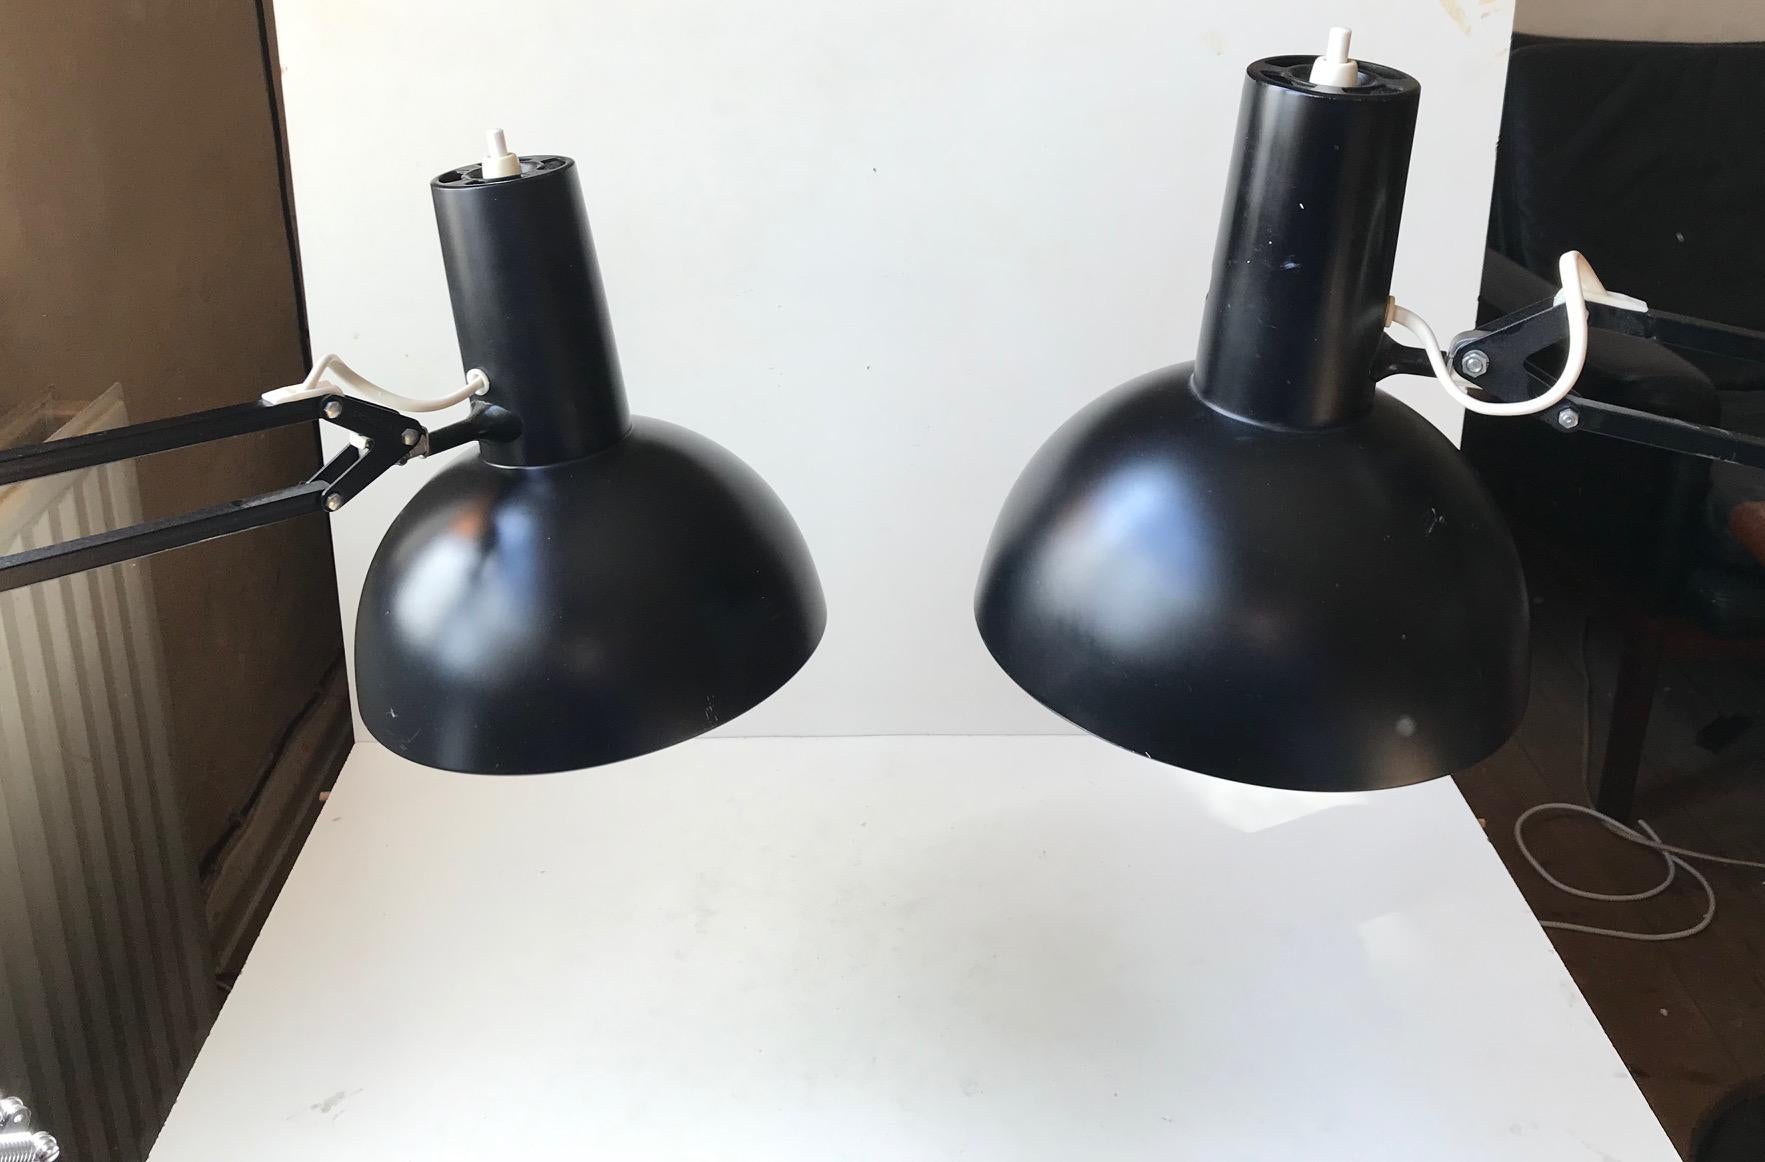 Often referred to as 'The Ghost of PH' and based on the Ideas of Poul Henningsen these fully adjustable black 'Anglepoise' desk or wall lights was designed in-house at Louis Poulsen in the early 1970s. Both with early LP stickers and porcelain